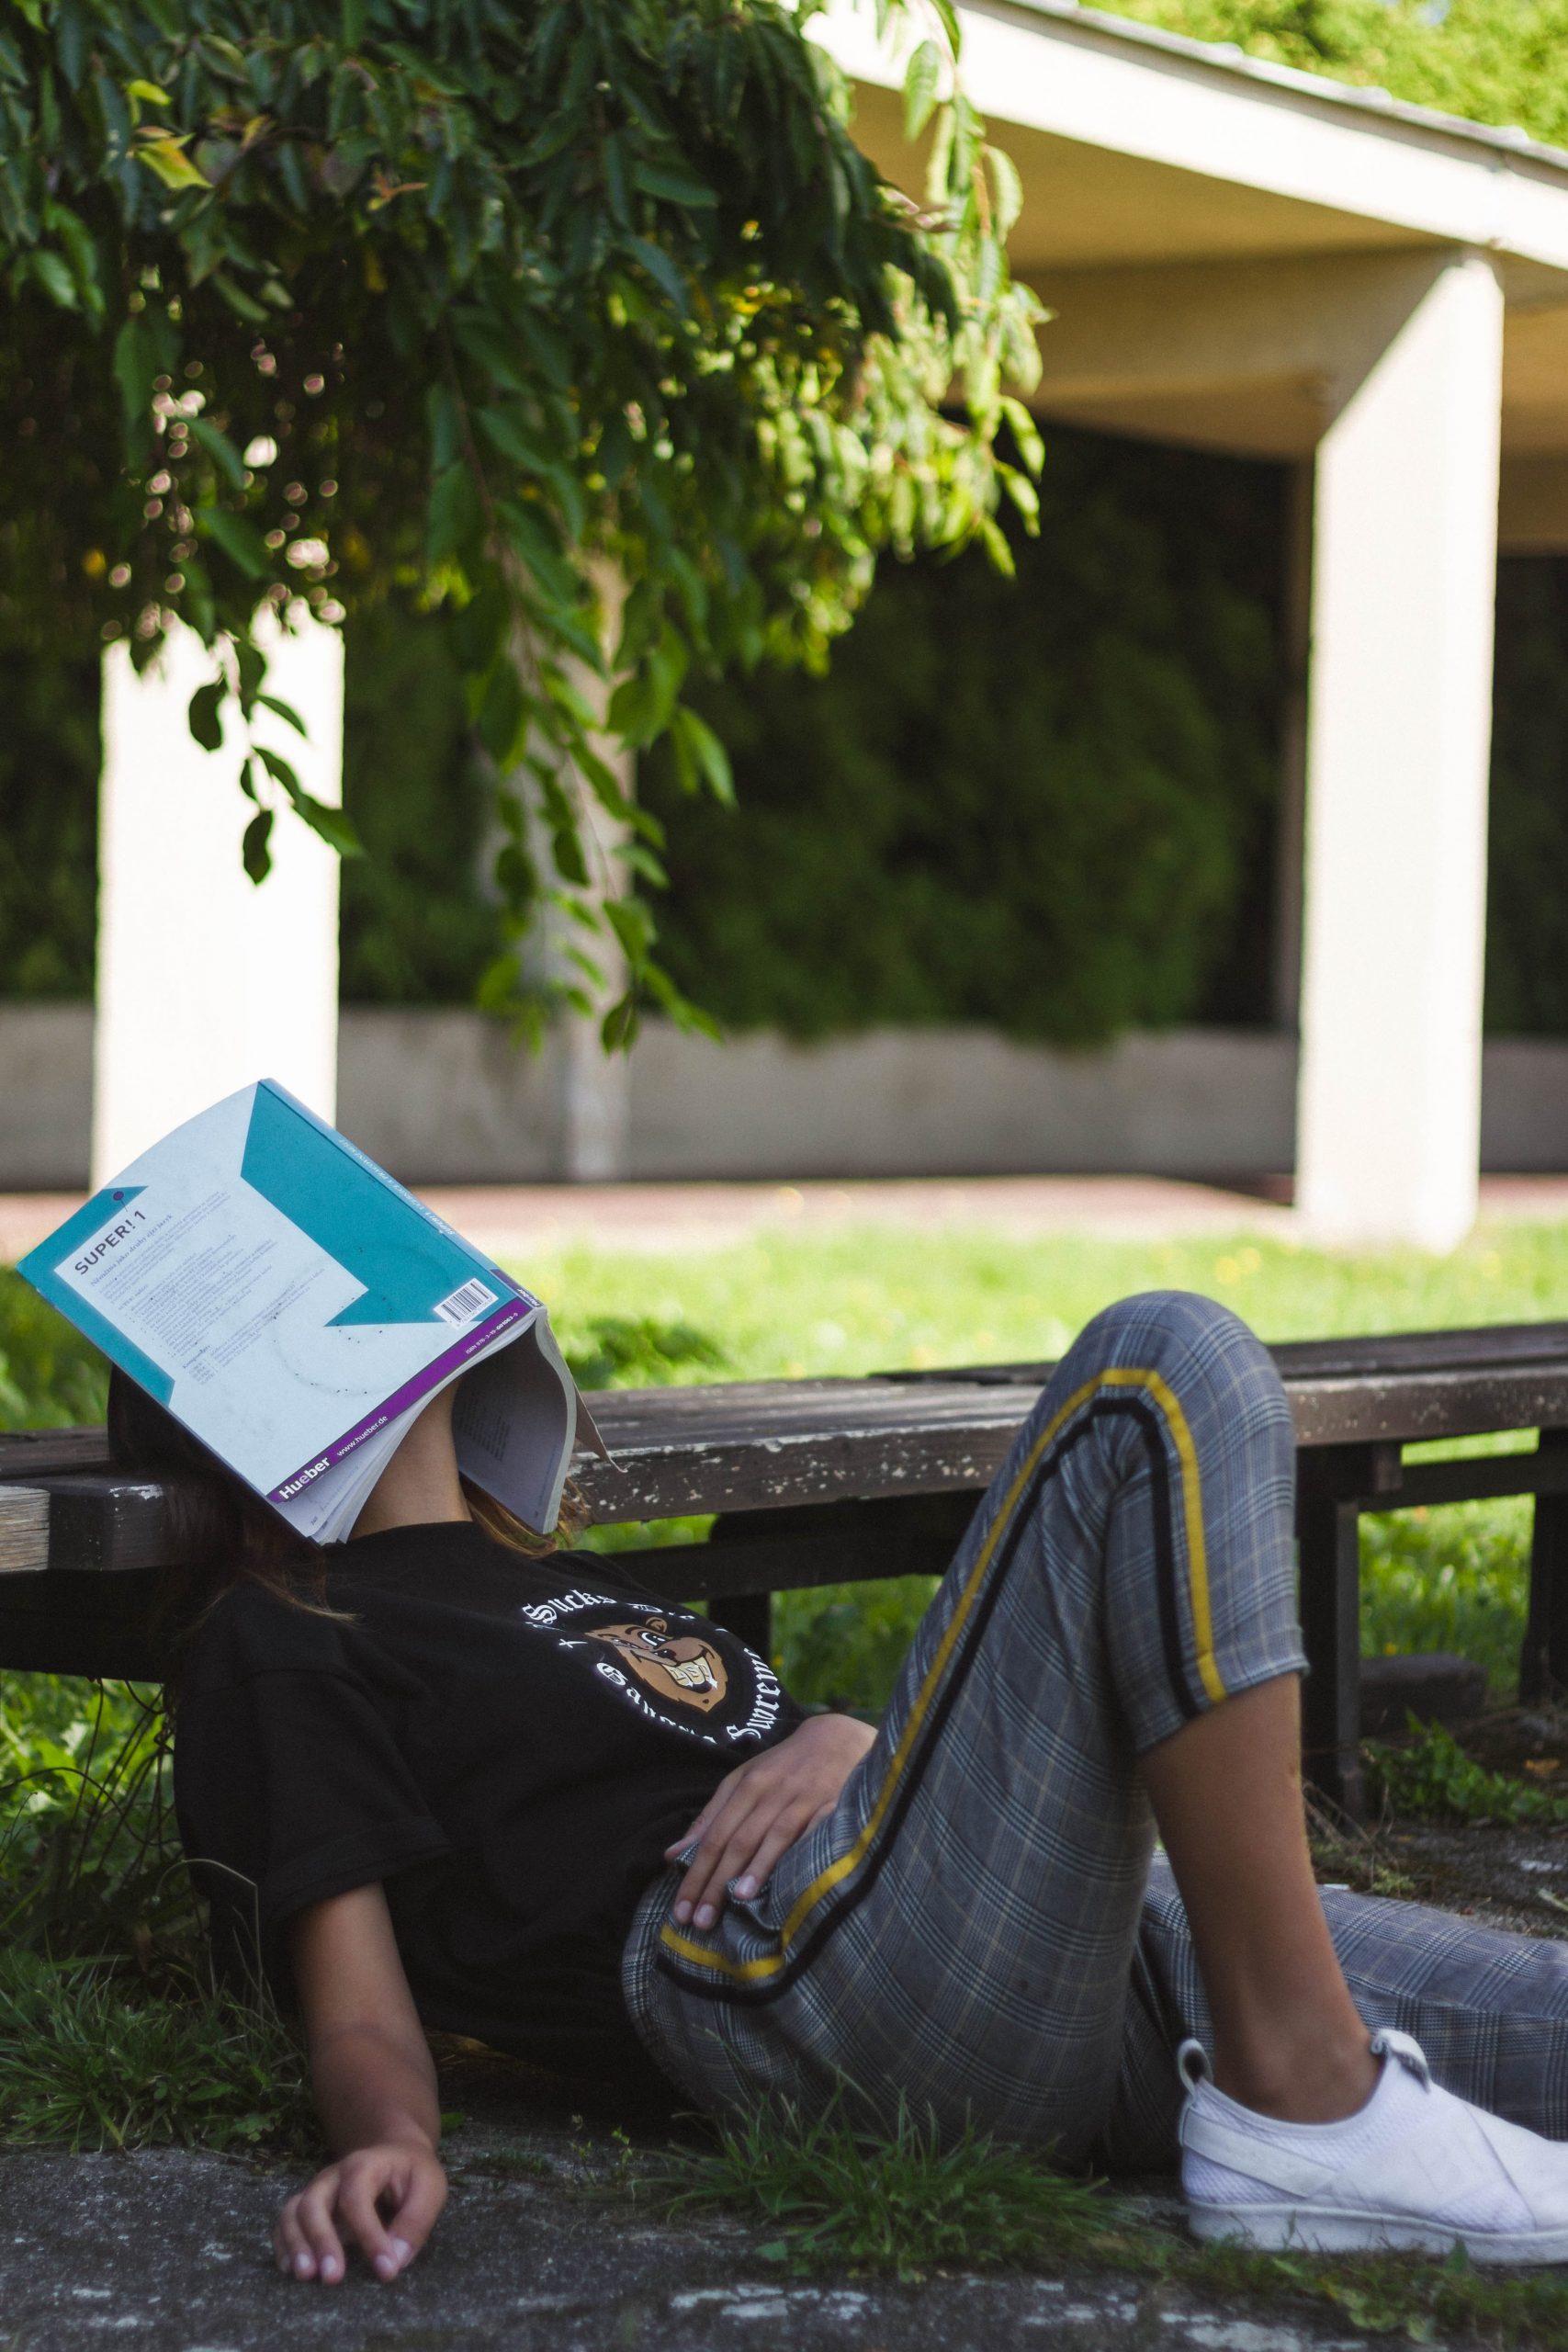 Woman on school campus leaning on a bench with a book covering her face, she is tired and the trees are green.